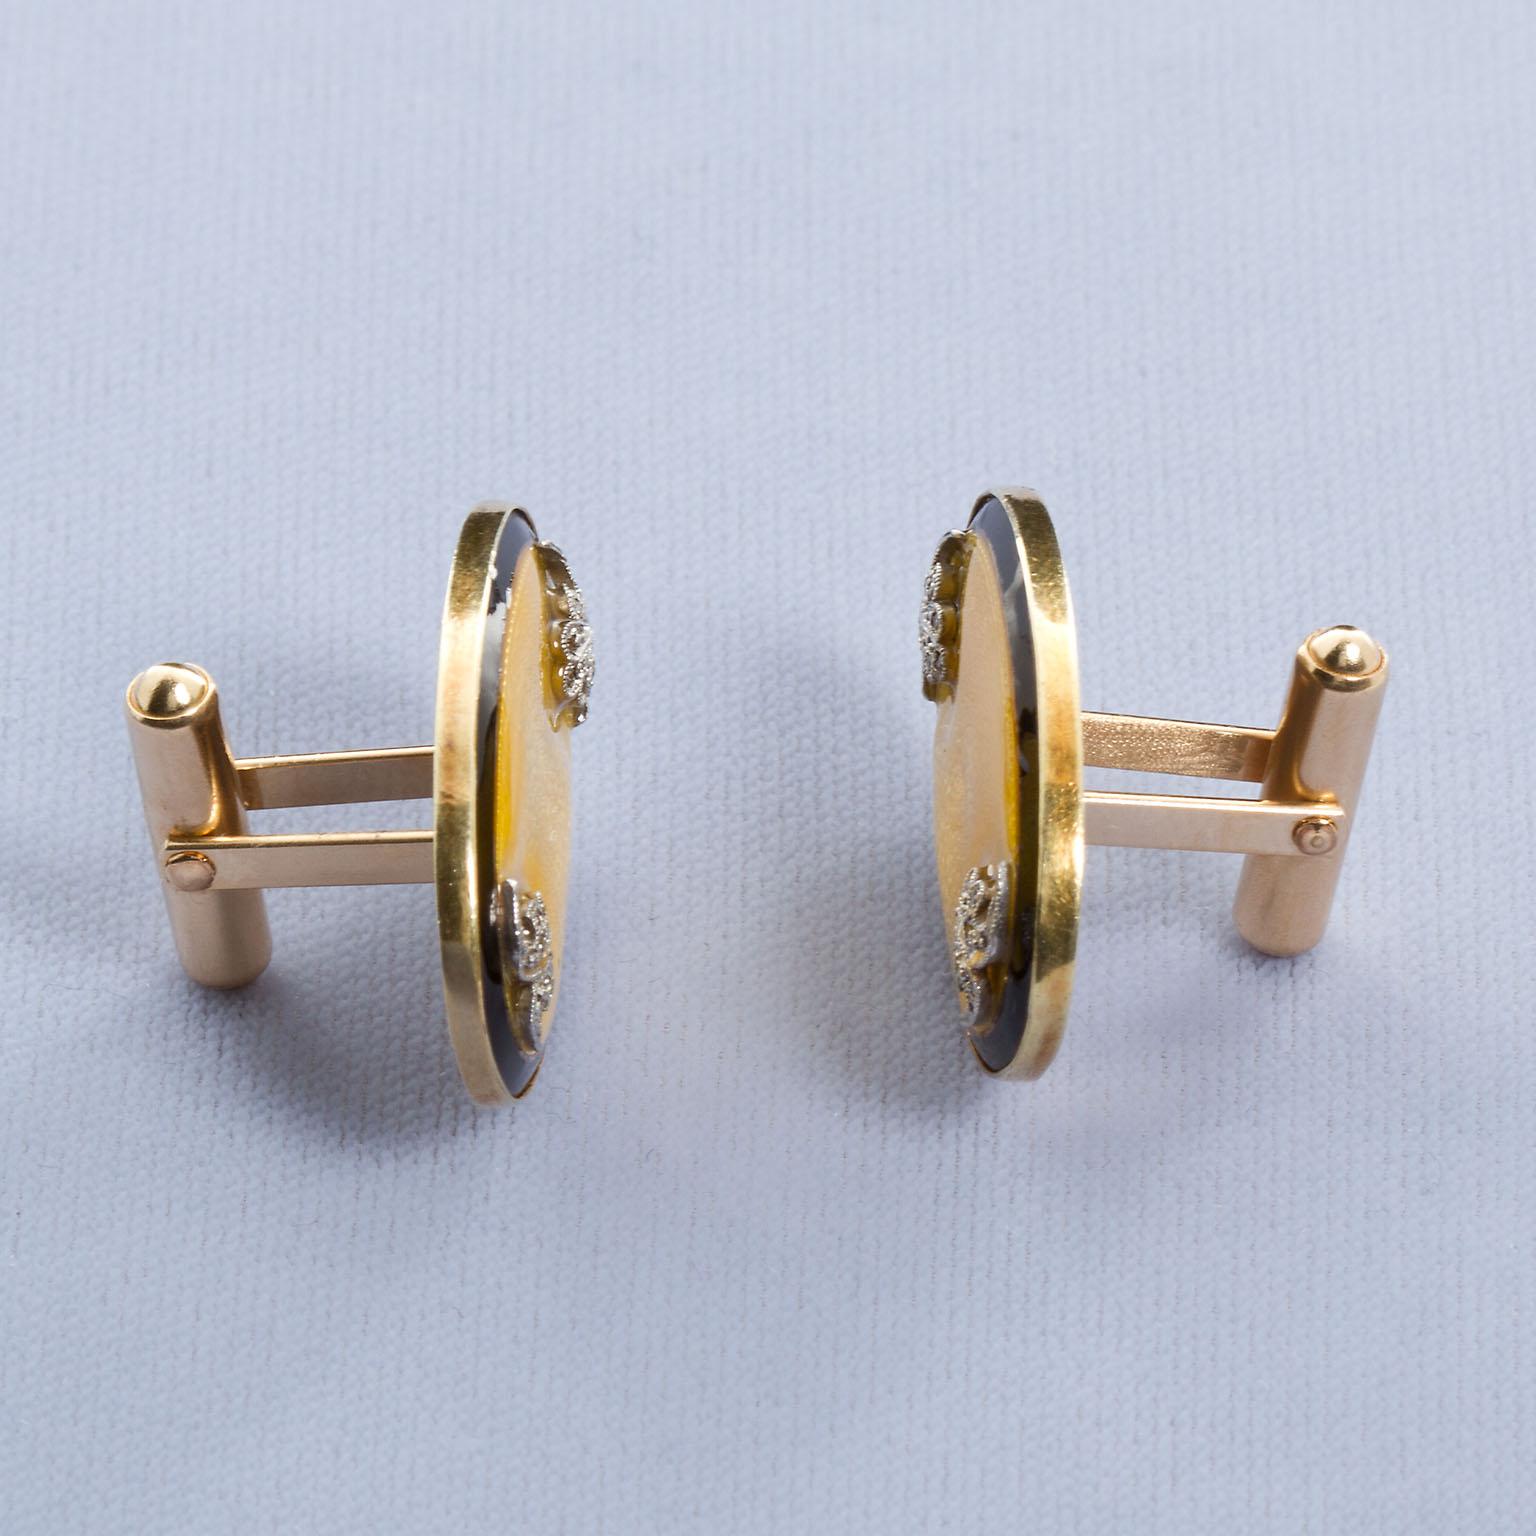 A dashing pair of diamond and gold cufflinks with black and clear enamel on yellow gold Guilloche style. These cufflinks exude a gentlemanly charm of the old days with magnificent Fleur-de-lis diamond in platinum accents at the two ends of each